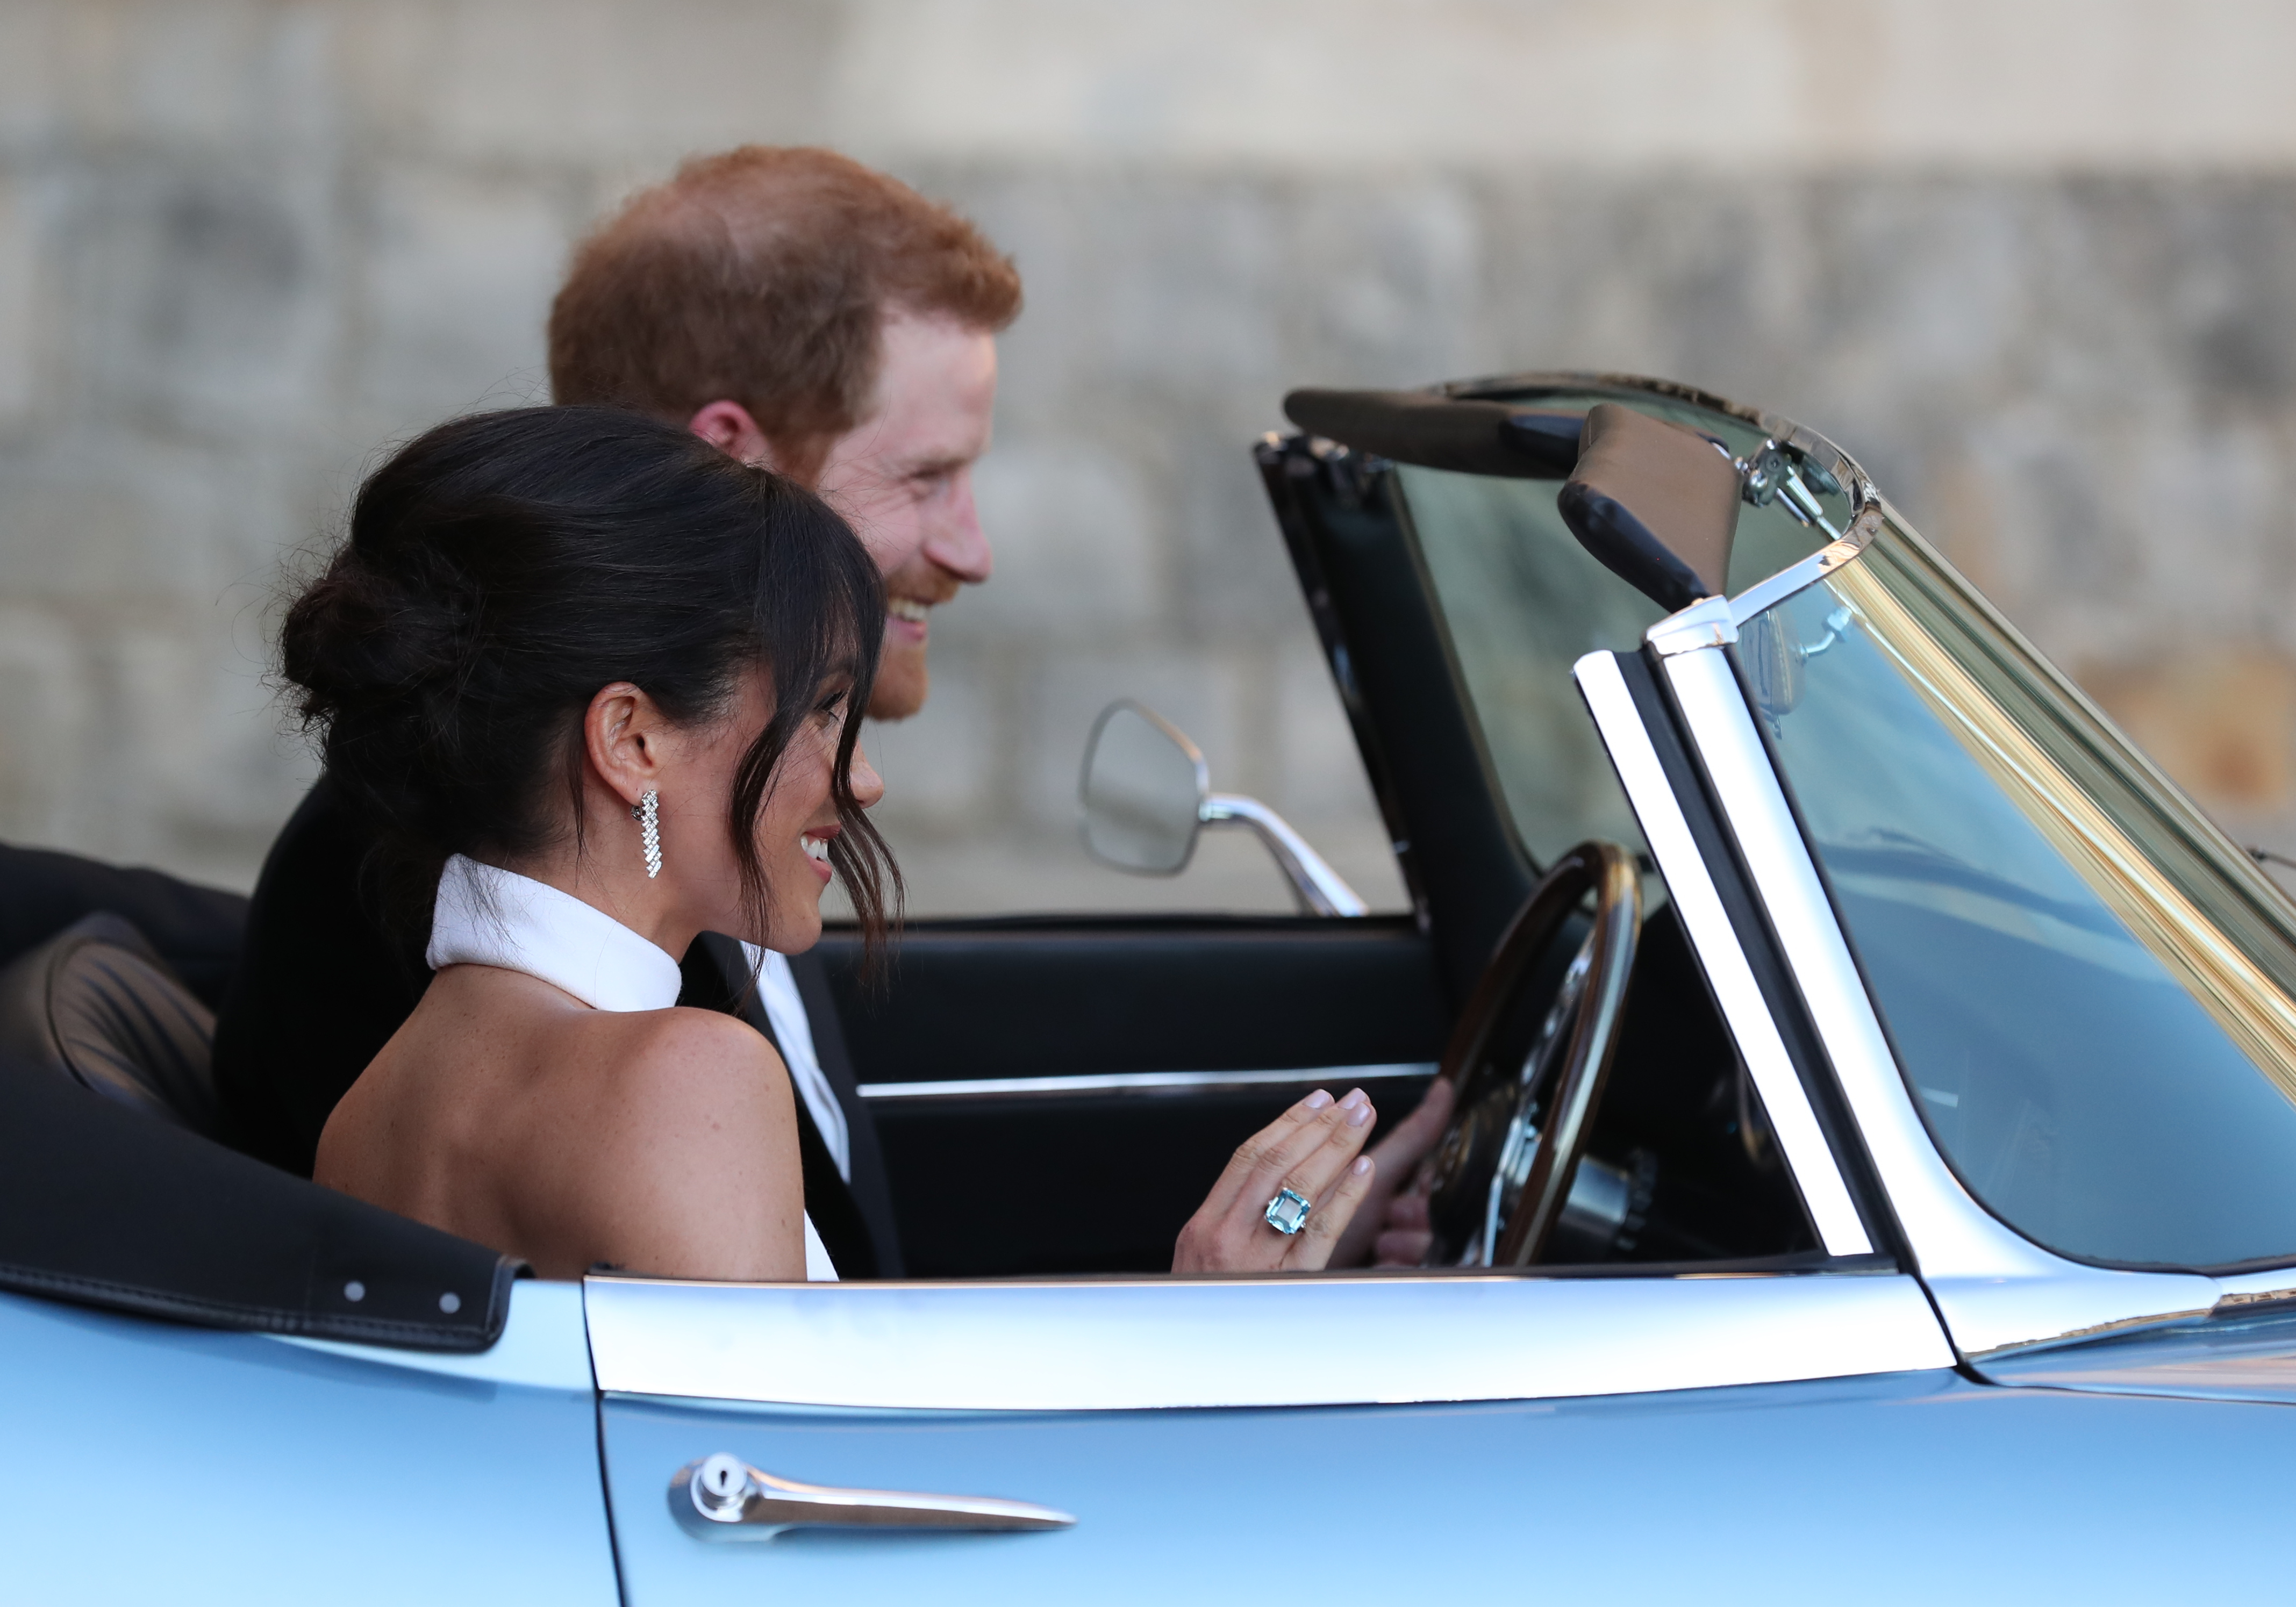 Duchess of Sussex and Prince Harry leaving Windsor Castle for an evening reception at Frogmore Hous on May 19, 2018. (Photo by Steve Parsons - WPA Pool/Getty Images) (WPA Pool&mdash;Getty Images)